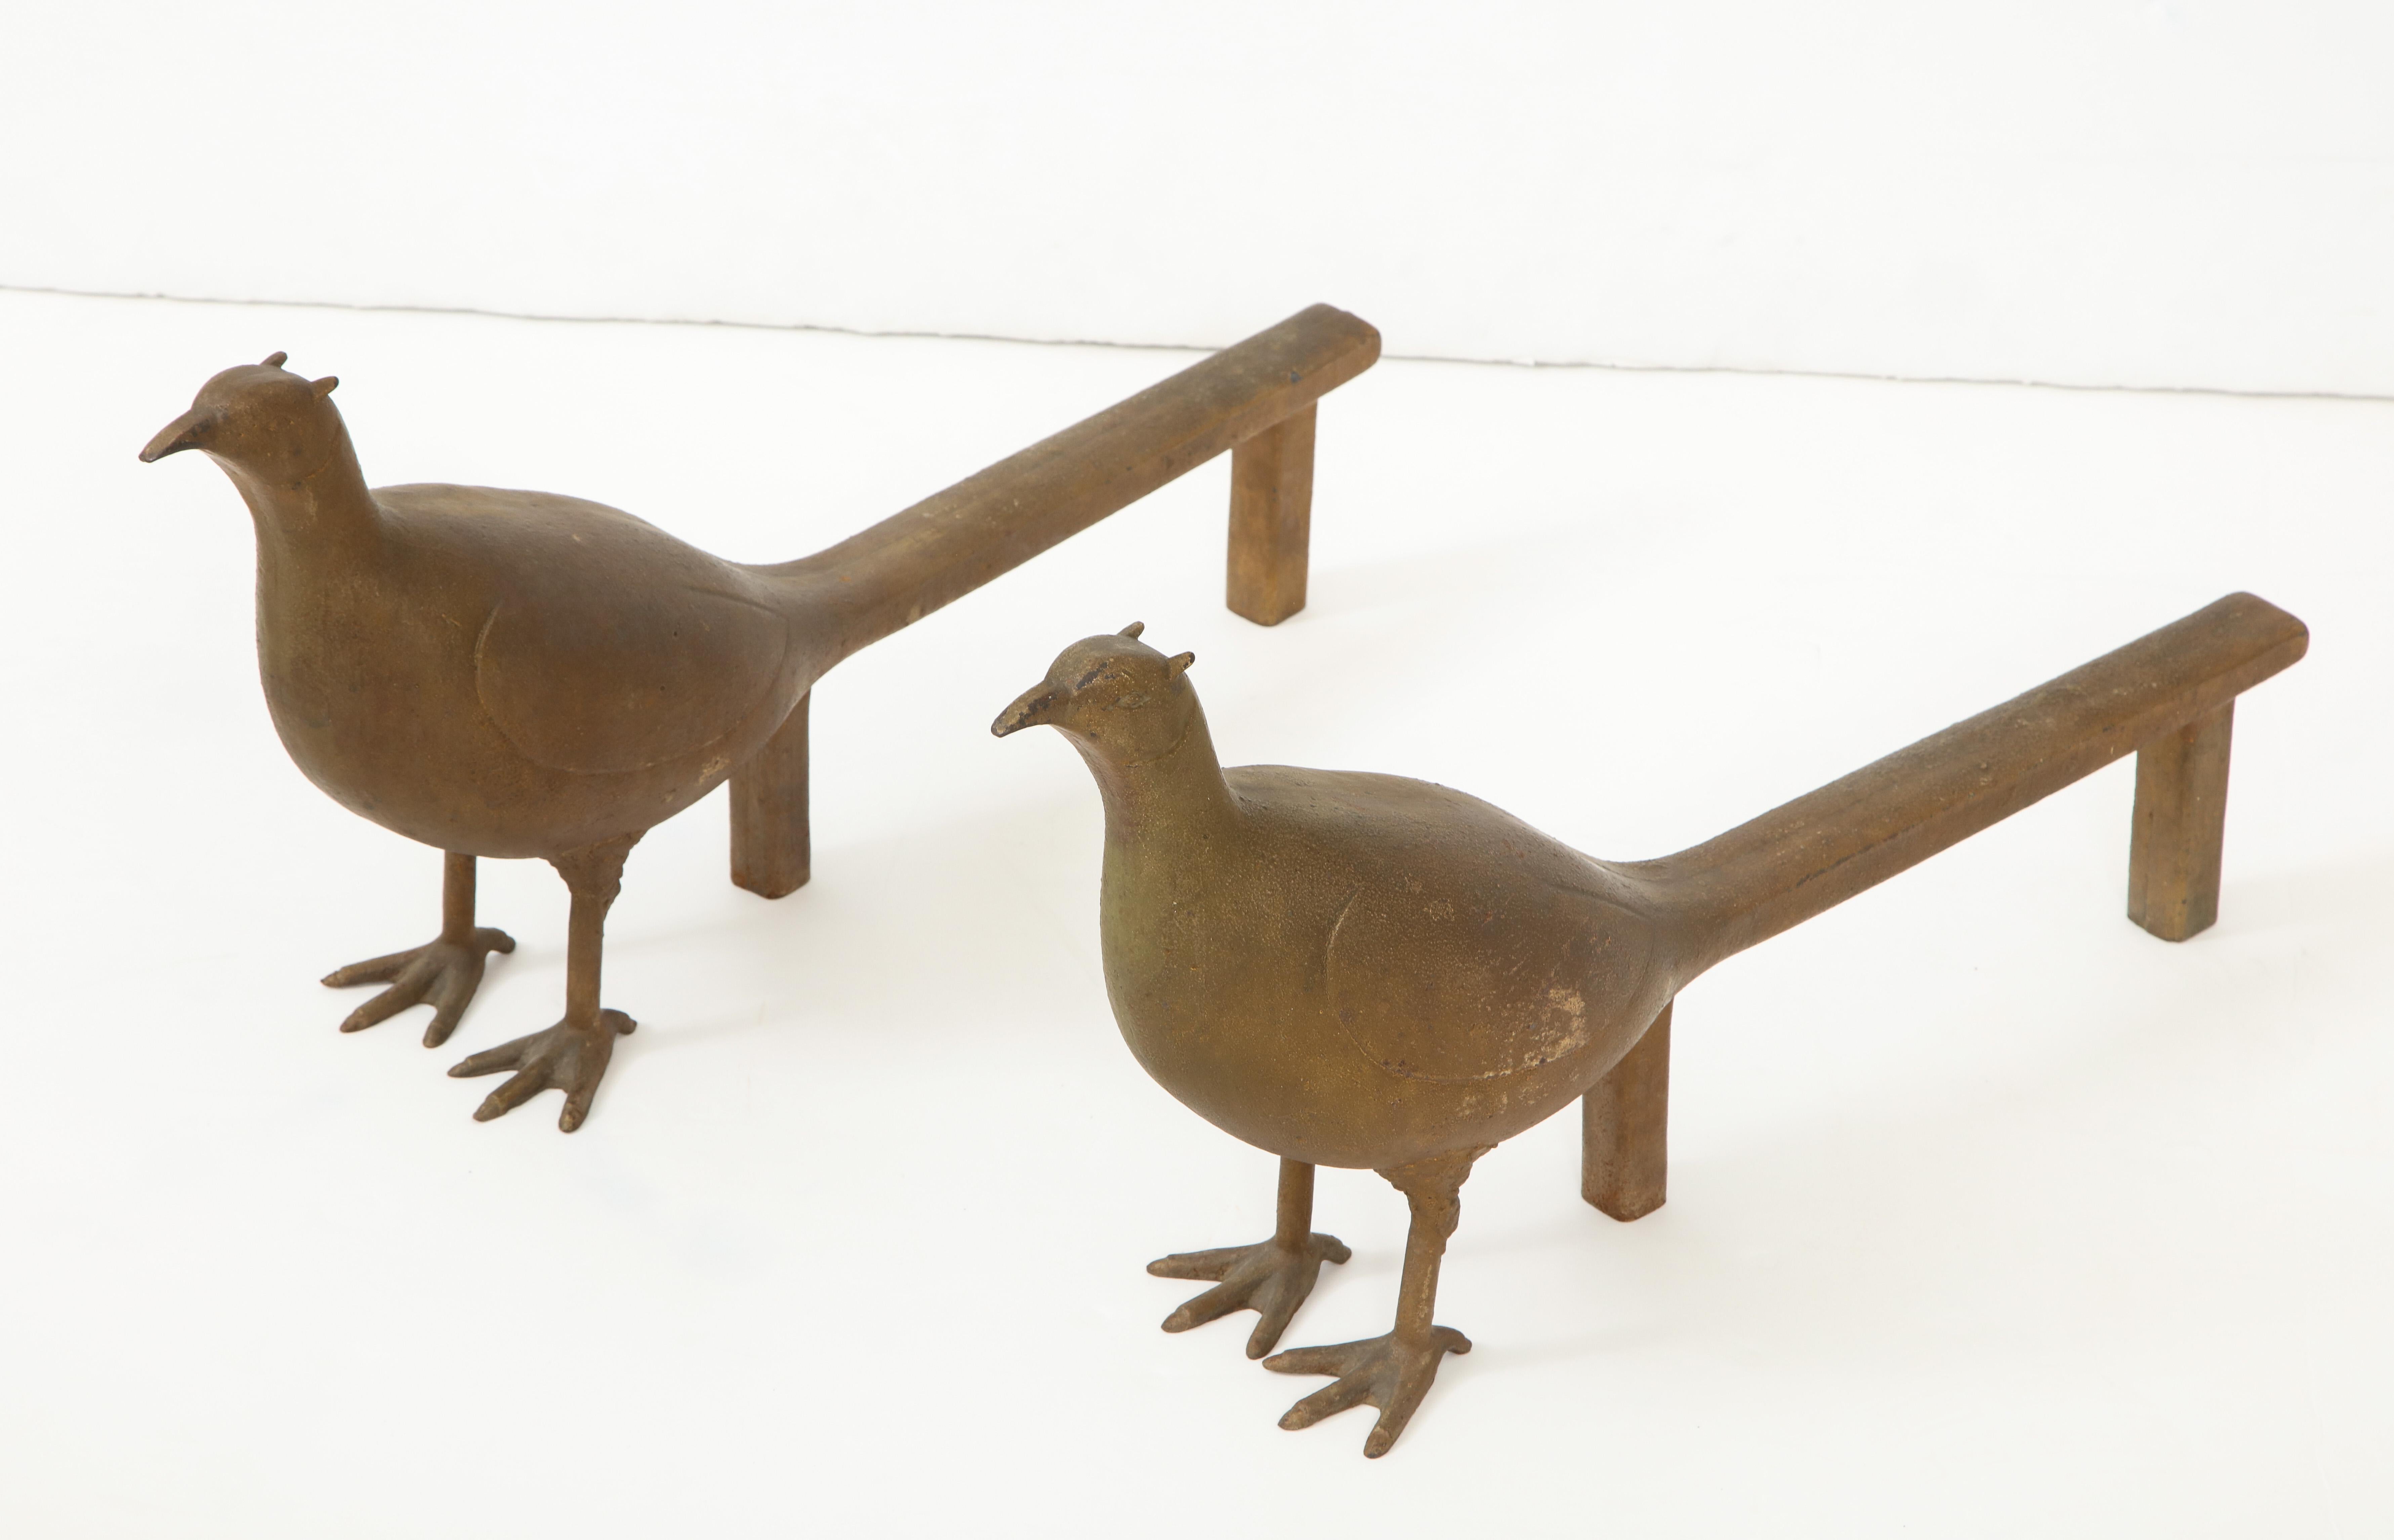 Pair of French 1950s pheasant andirons.
The birds have wonderful detailing and aged finish to them.